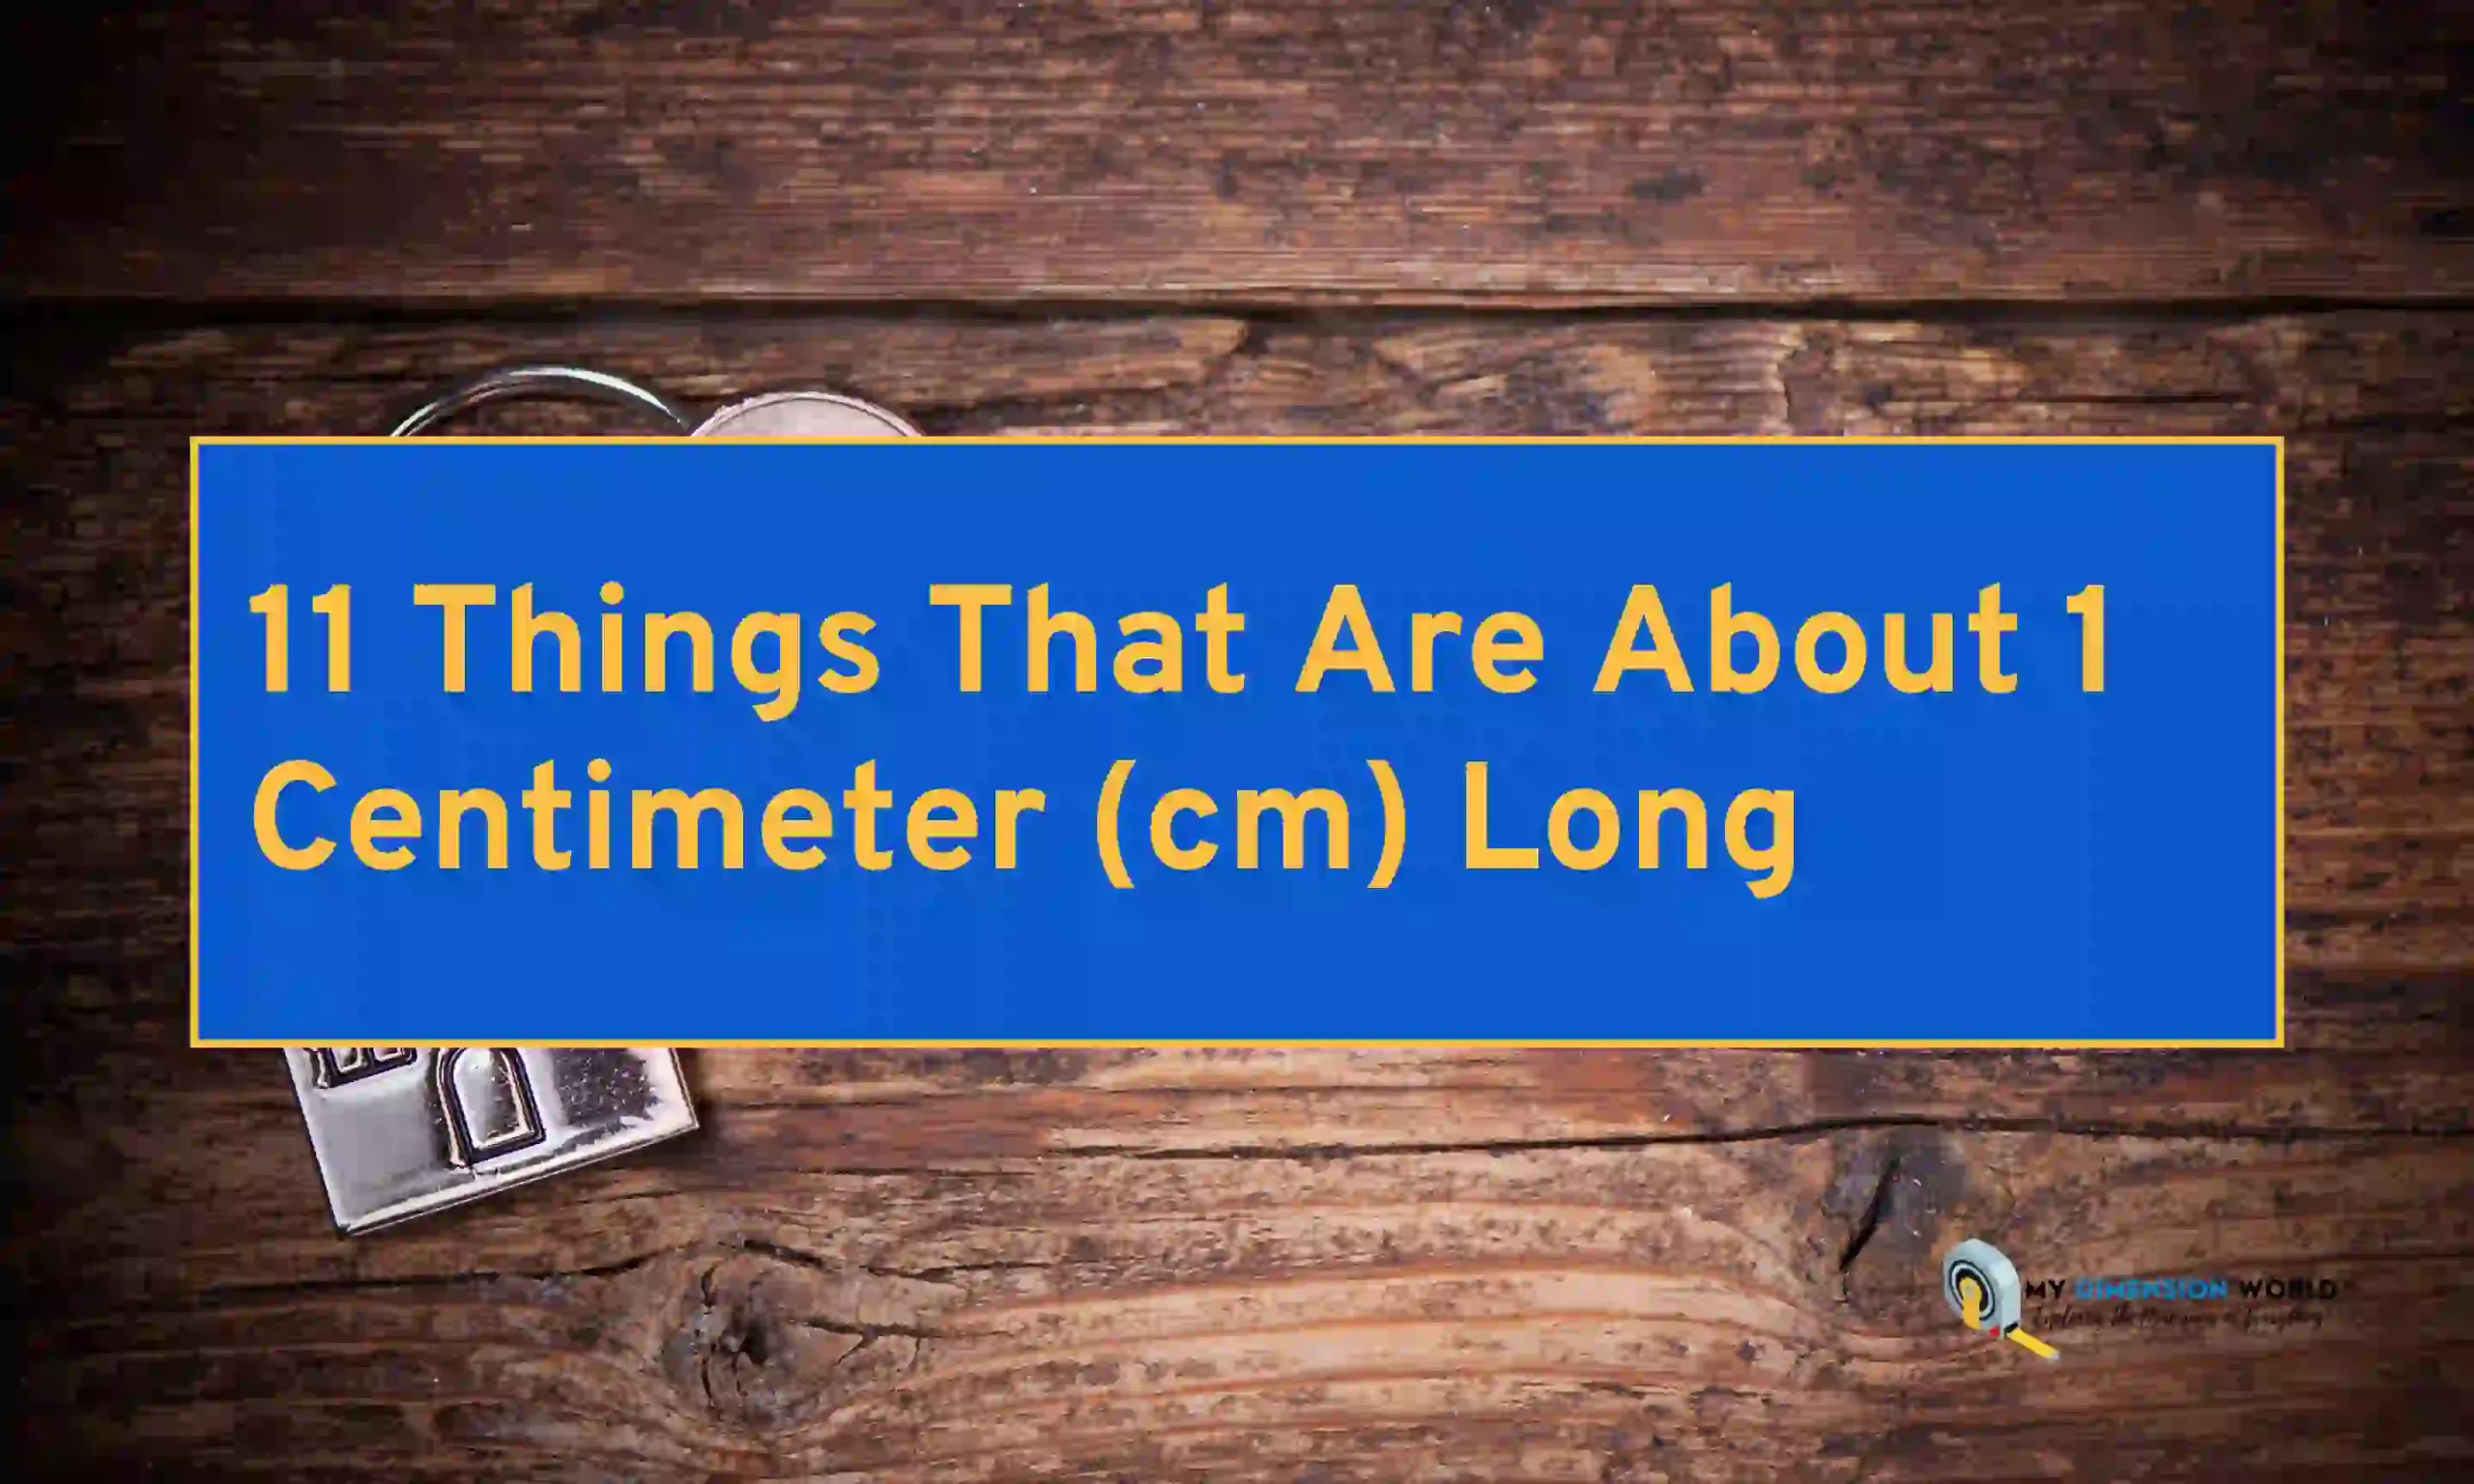 11 Things That Are About 1 Centimeter (cm) Long